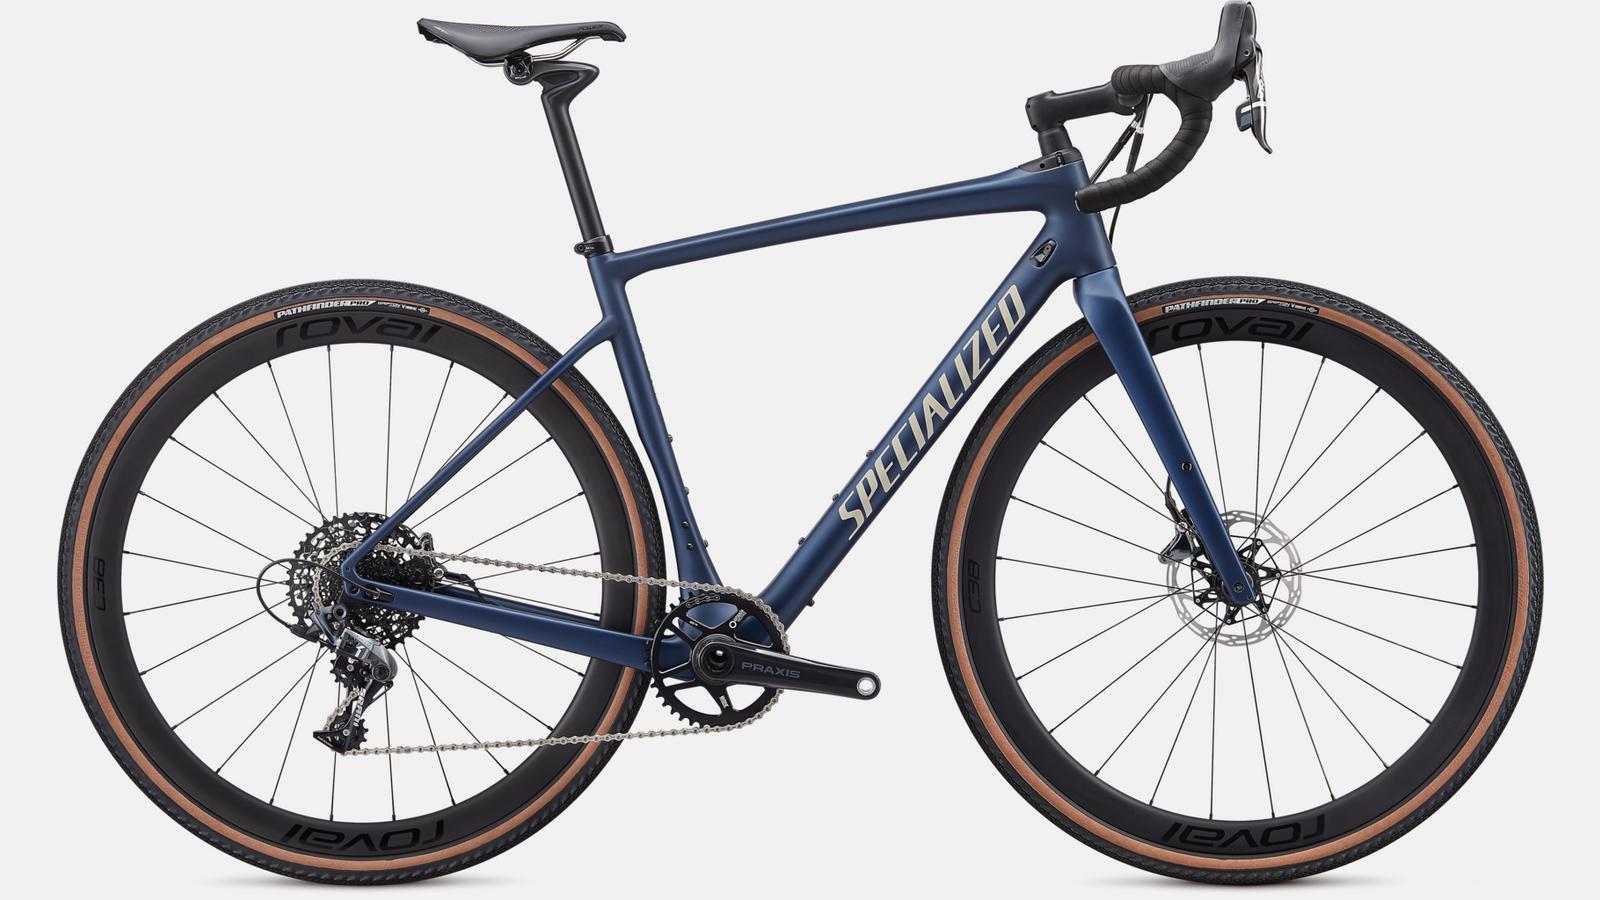 Paint for 2020 Specialized Diverge Expert - Satin Navy